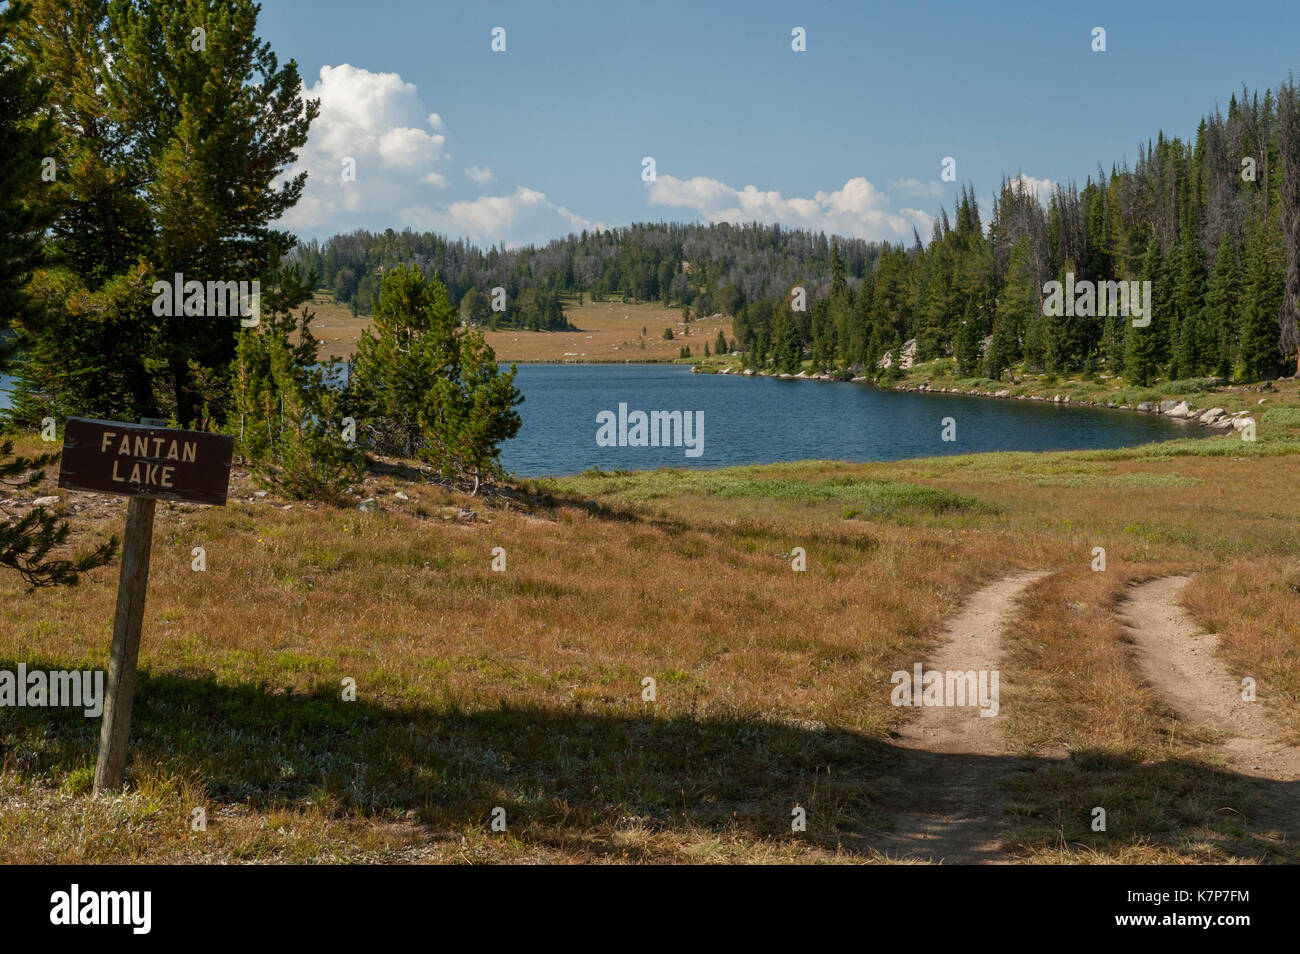 Fantan Lake, in the Beartooth Mountains of northern Wyoming/southern Montana. Stock Photo